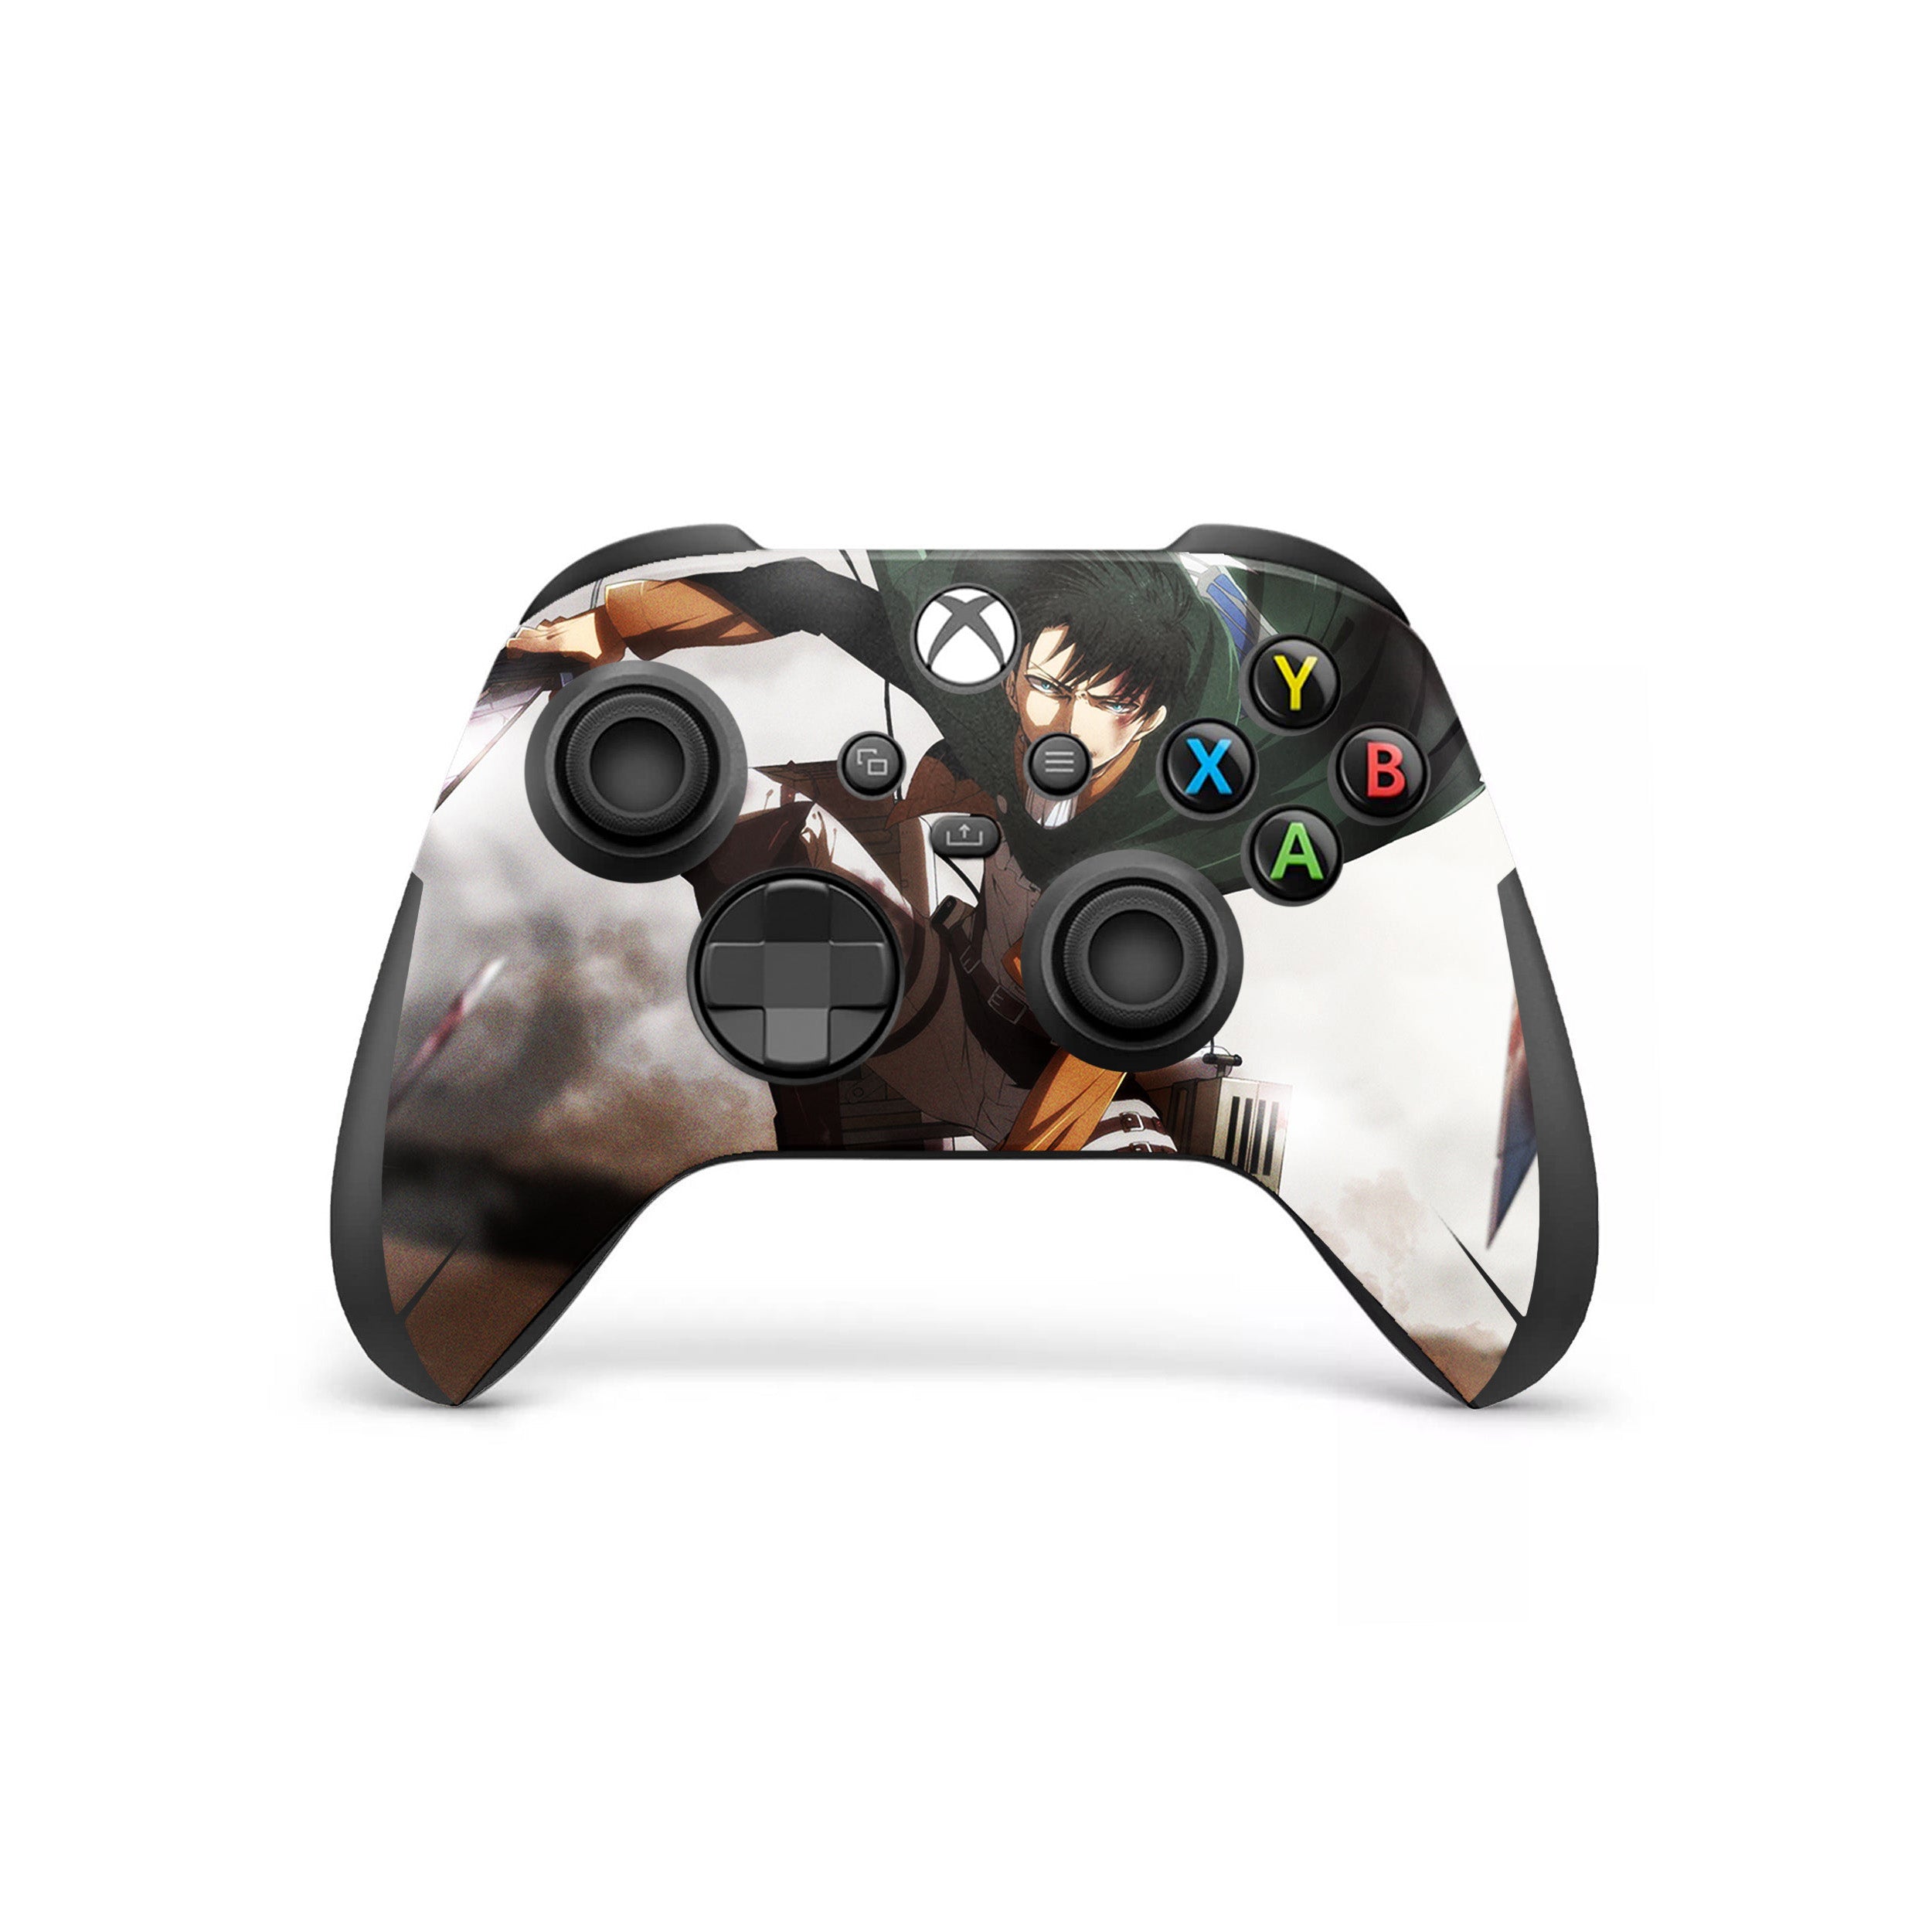 A video game skin featuring a Attack On Titan Levi Ackerman design for the Xbox Wireless Controller.